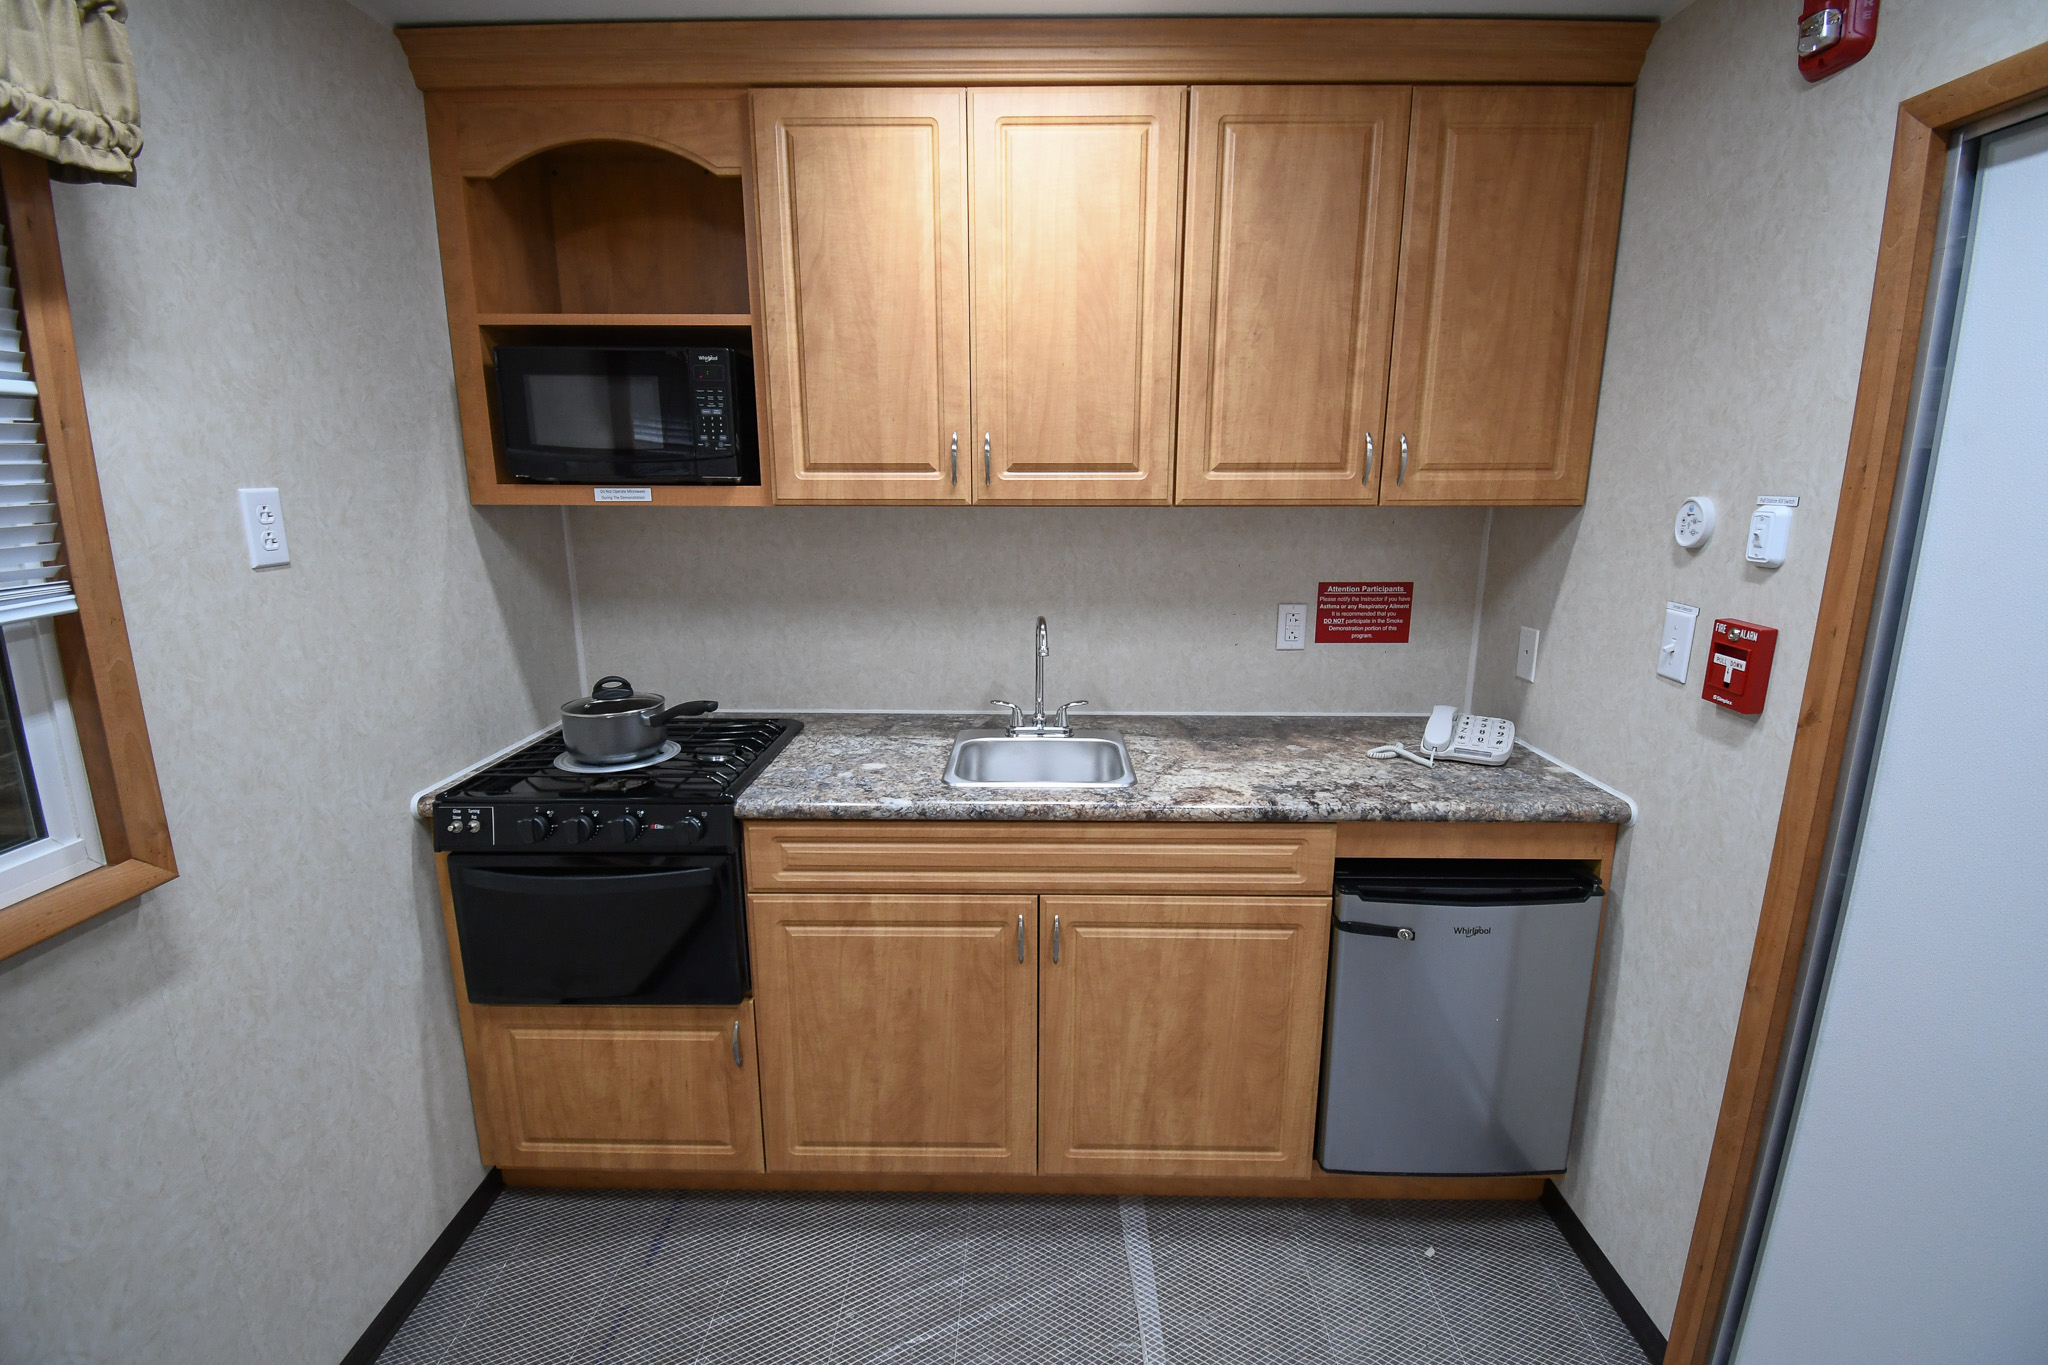 A view of the kitchen stage inside the unit for Gaithersburg, MD.